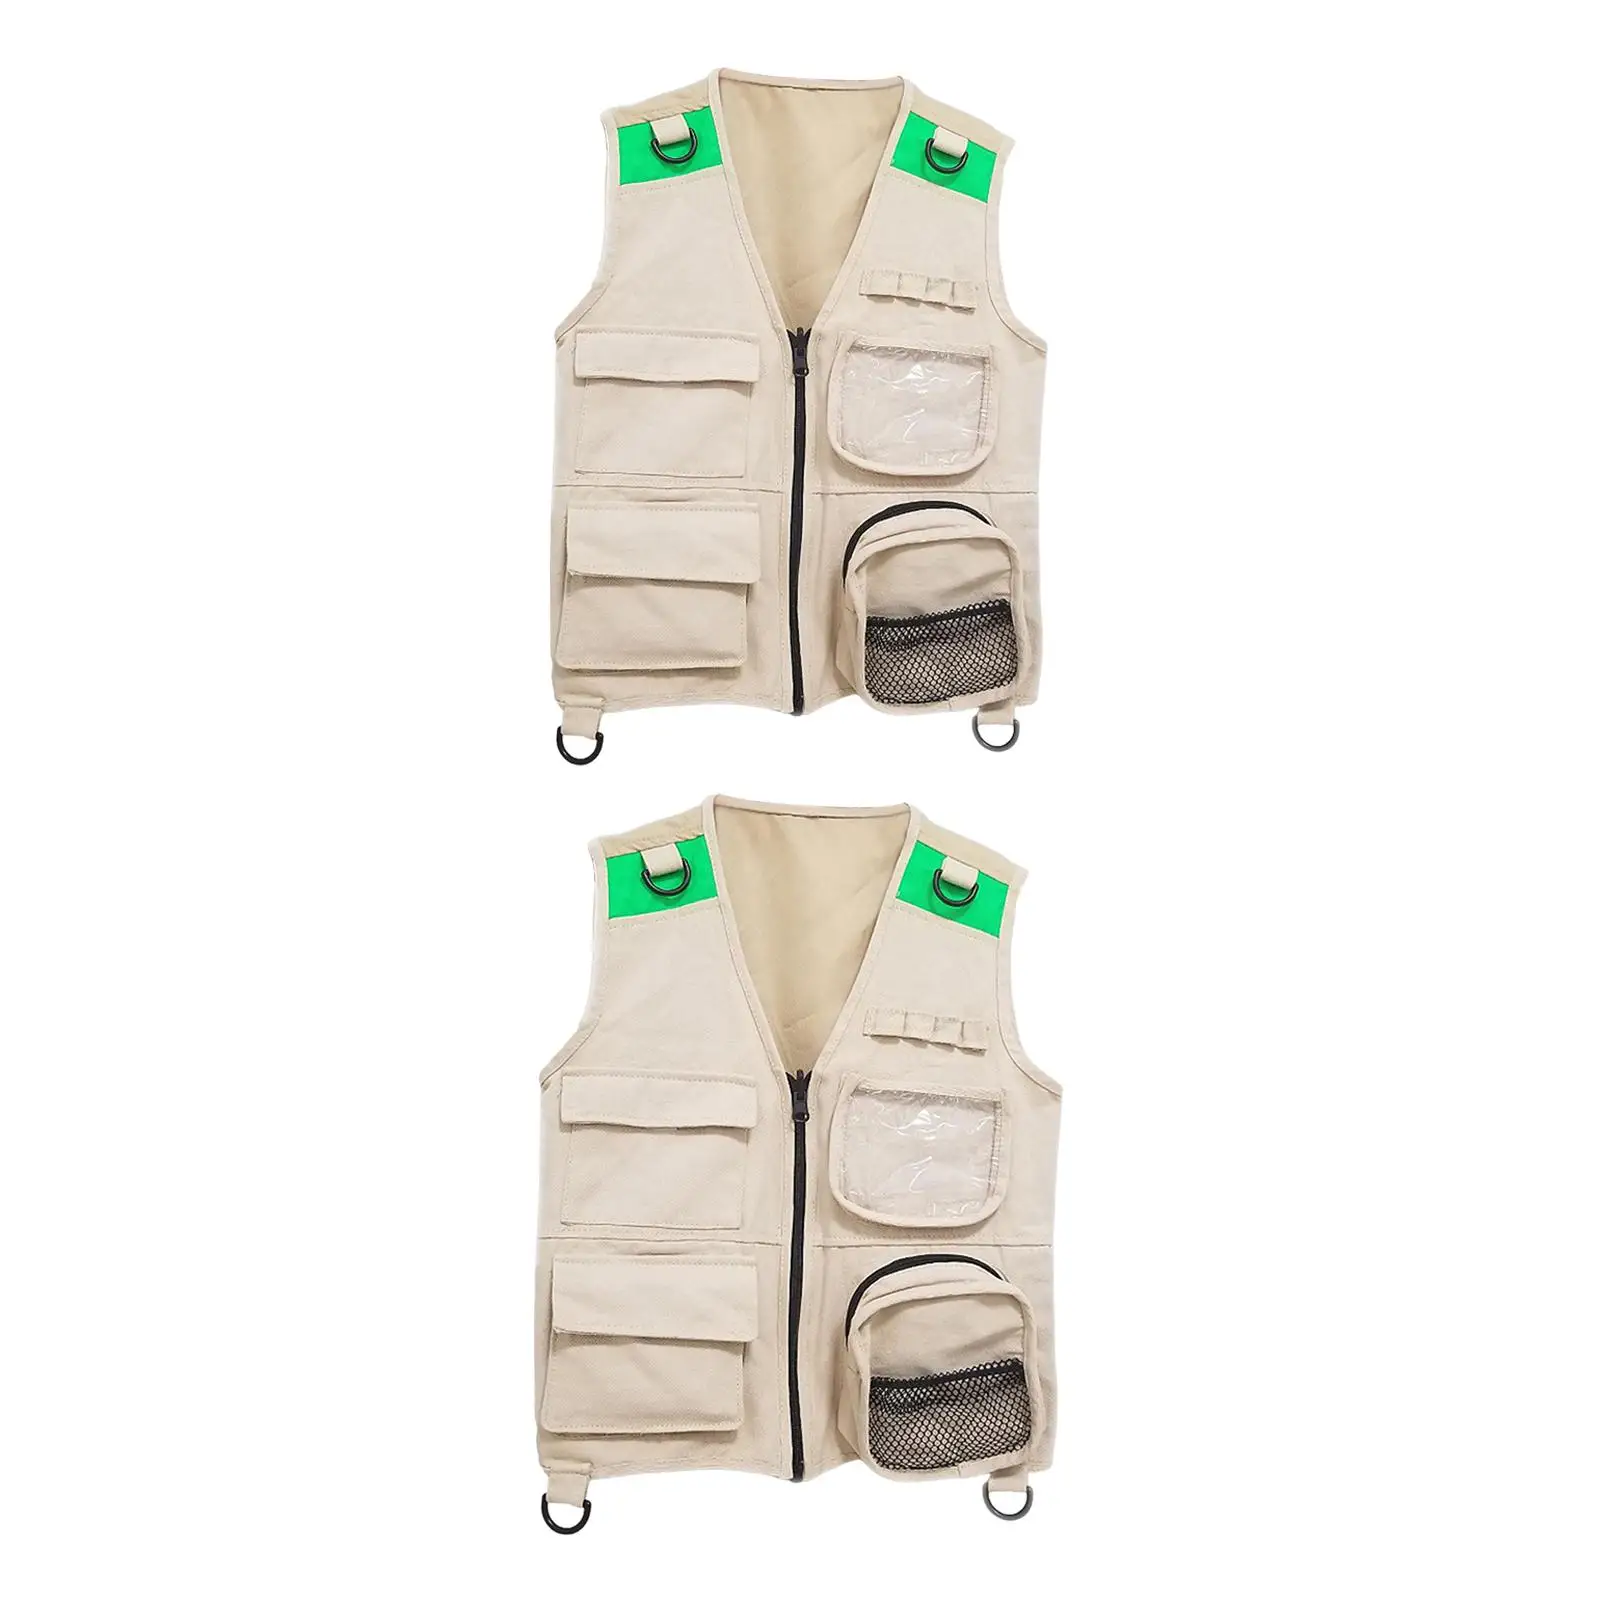 Kids Costume Vest Cargo Vest Dress Up for Party Favors Hiking Zoo Keeper